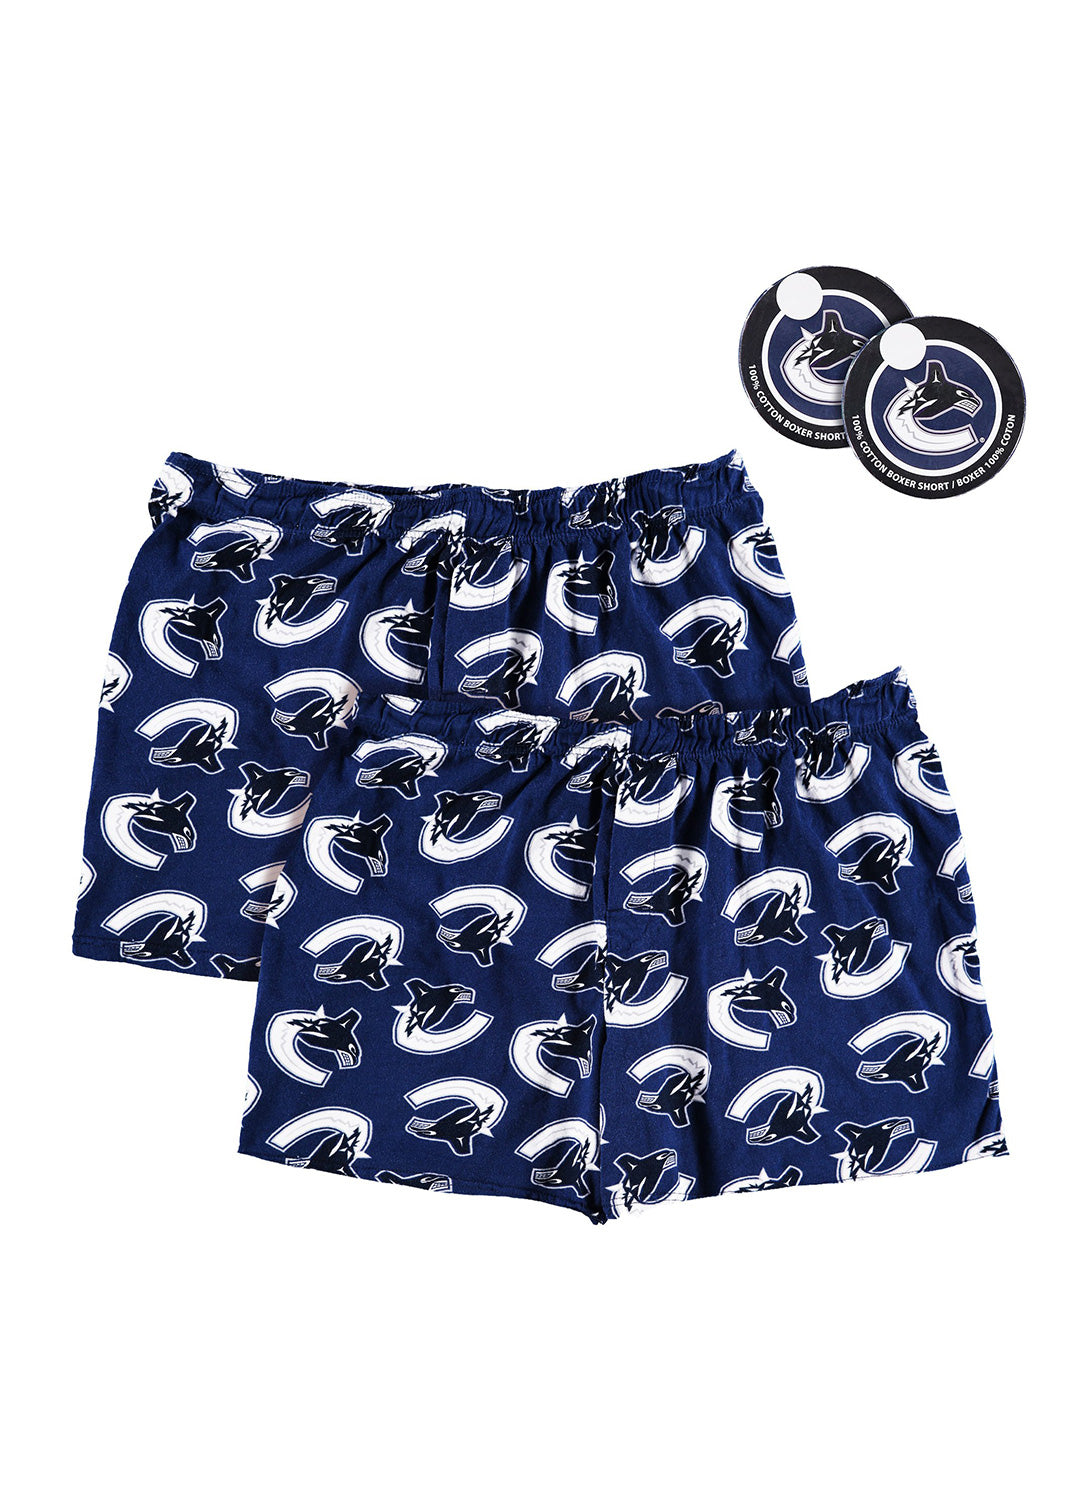 Pair of mens boxers with Vancouver Canucks print (blue)